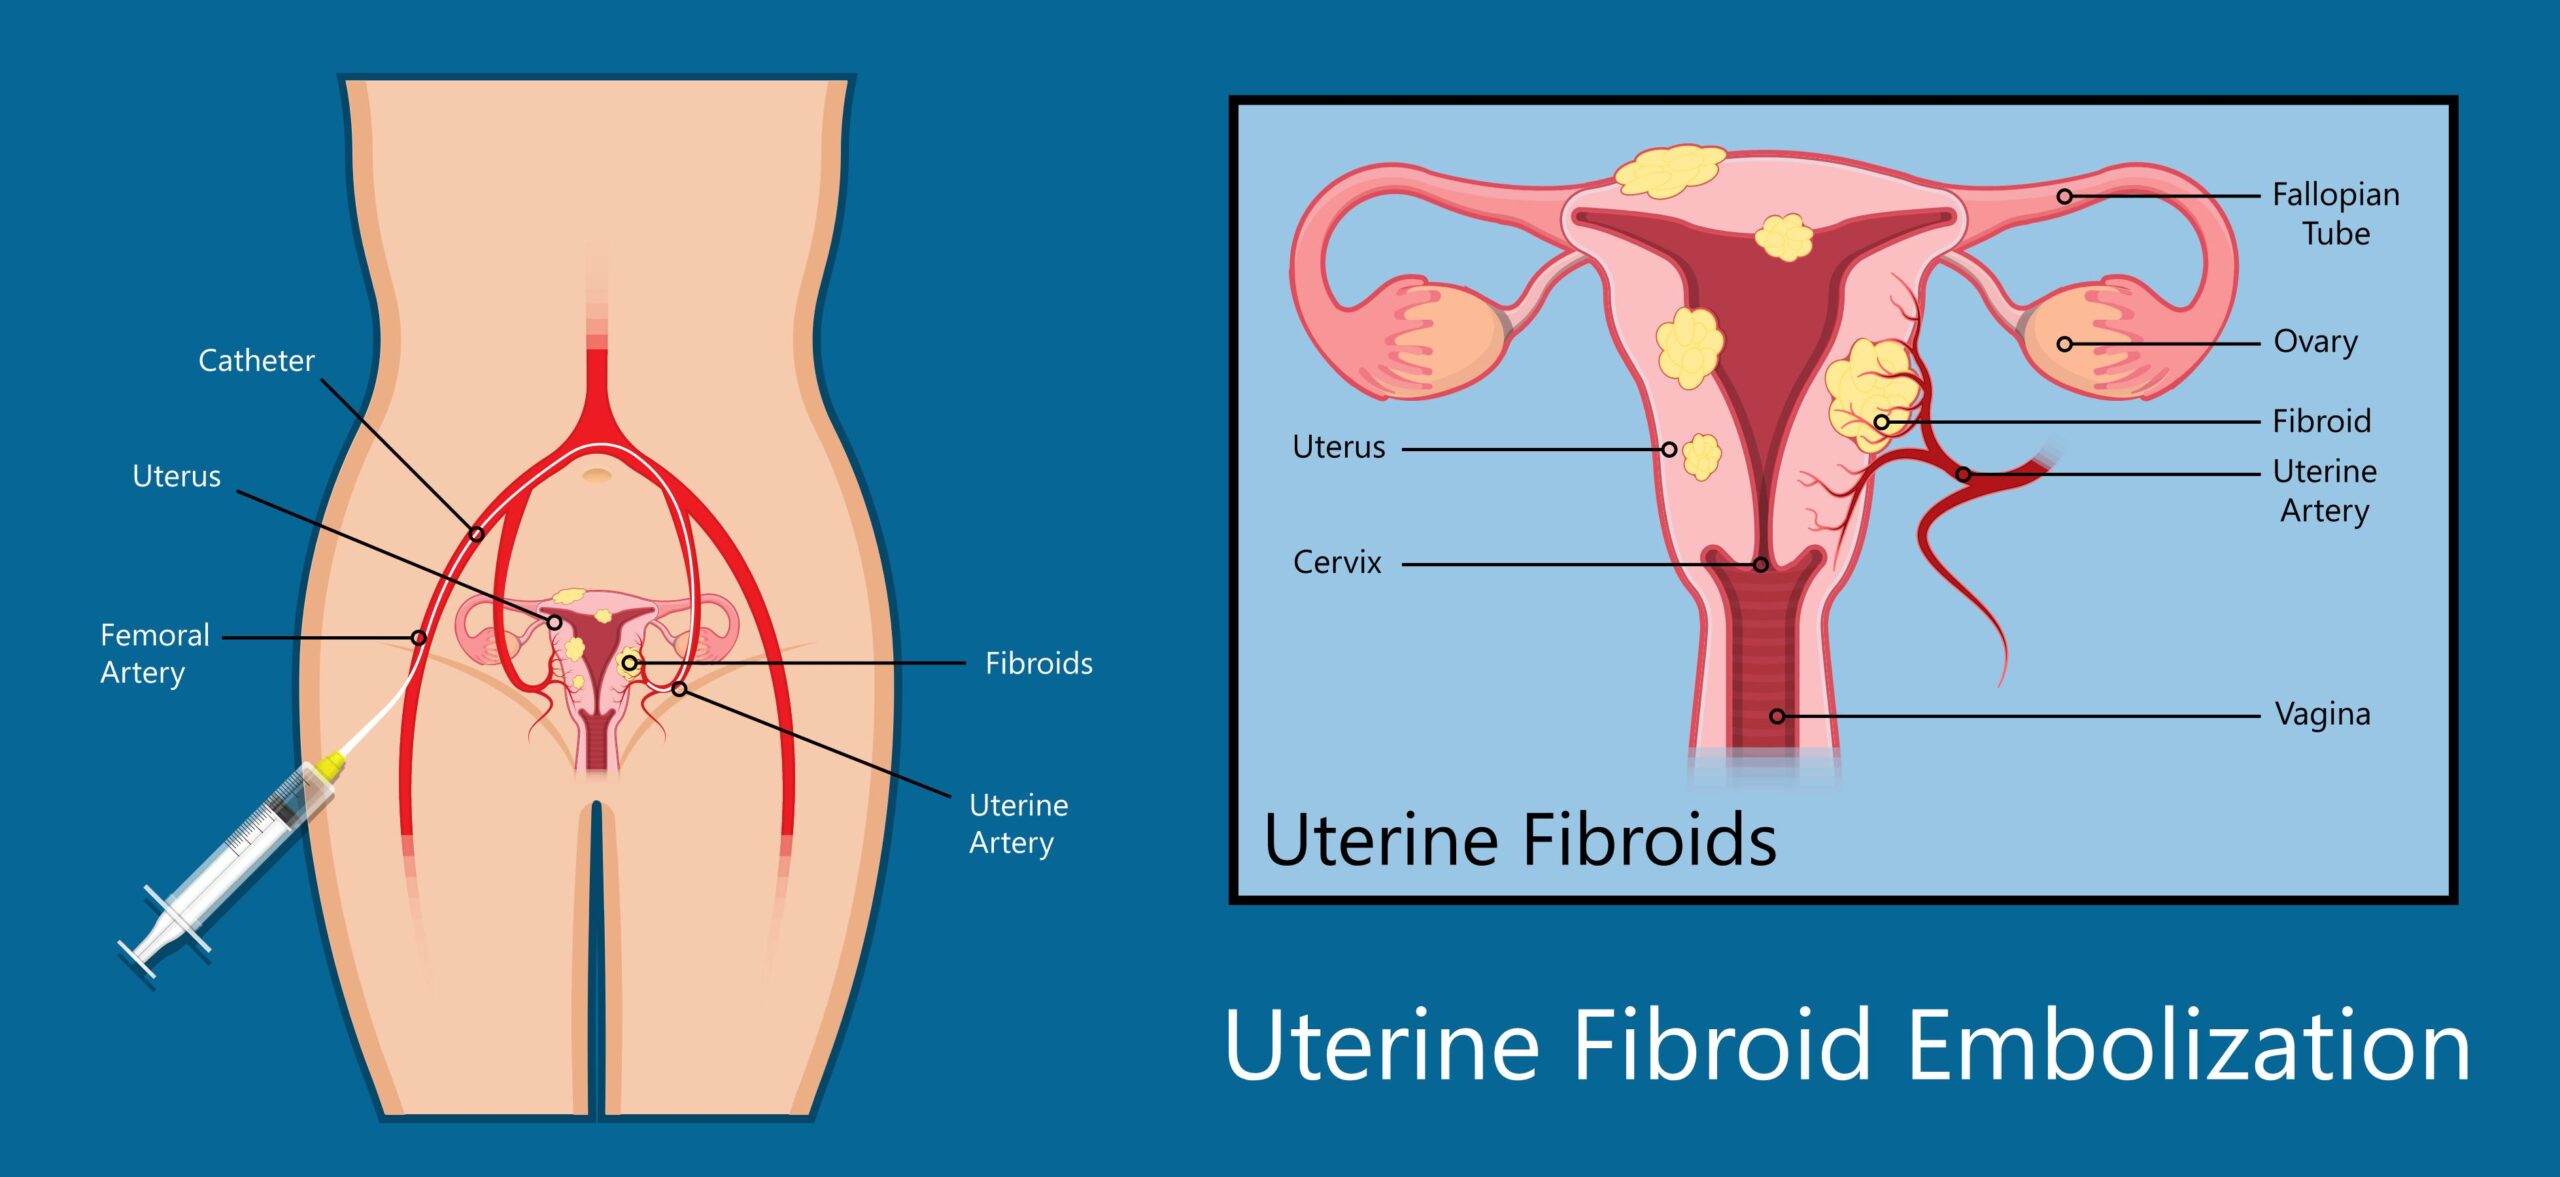 shutterstock 1194708520 1 ai 1 scaled showing the concept of Uterine Fibroid Embolization